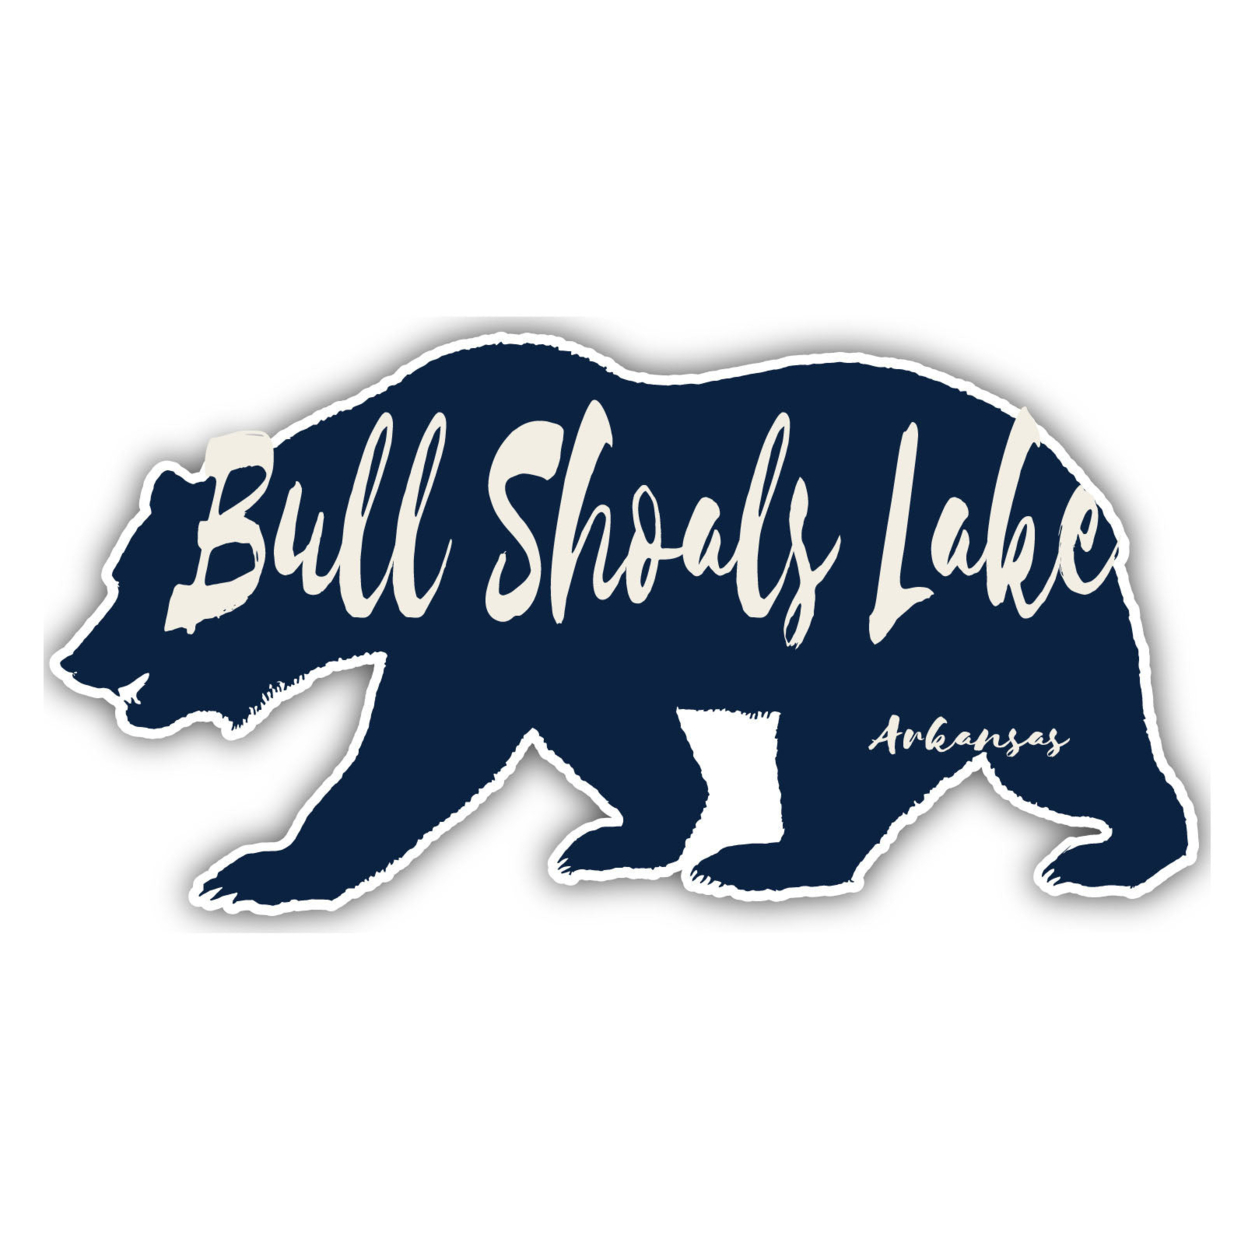 Bull Shoals Lake Arkansas Souvenir Decorative Stickers (Choose Theme And Size) - 4-Pack, 8-Inch, Camp Life